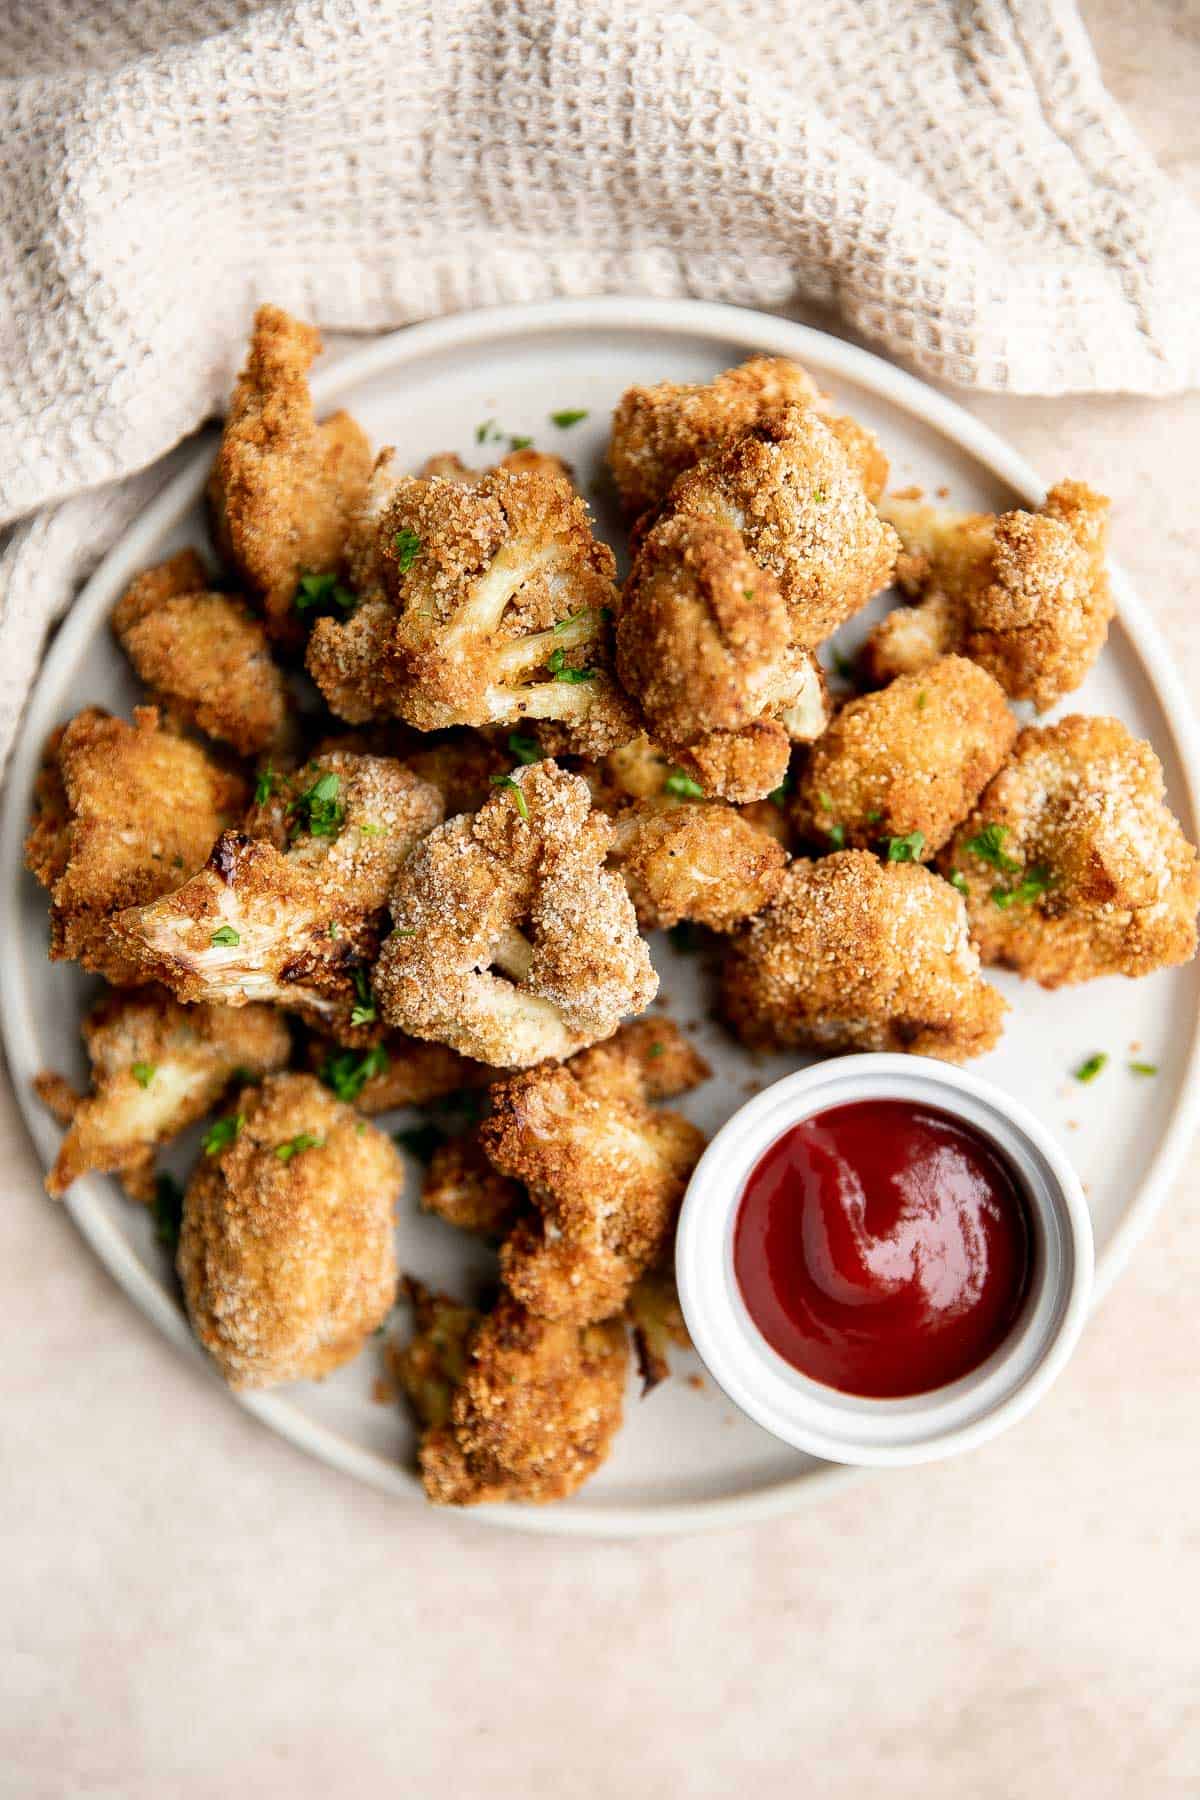 Air fryer cauliflower bites have a crispy breaded coating outside, yet tender and light inside. They are bite-sized, flavorful, easy to make, and healthy. | aheadofthyme.com